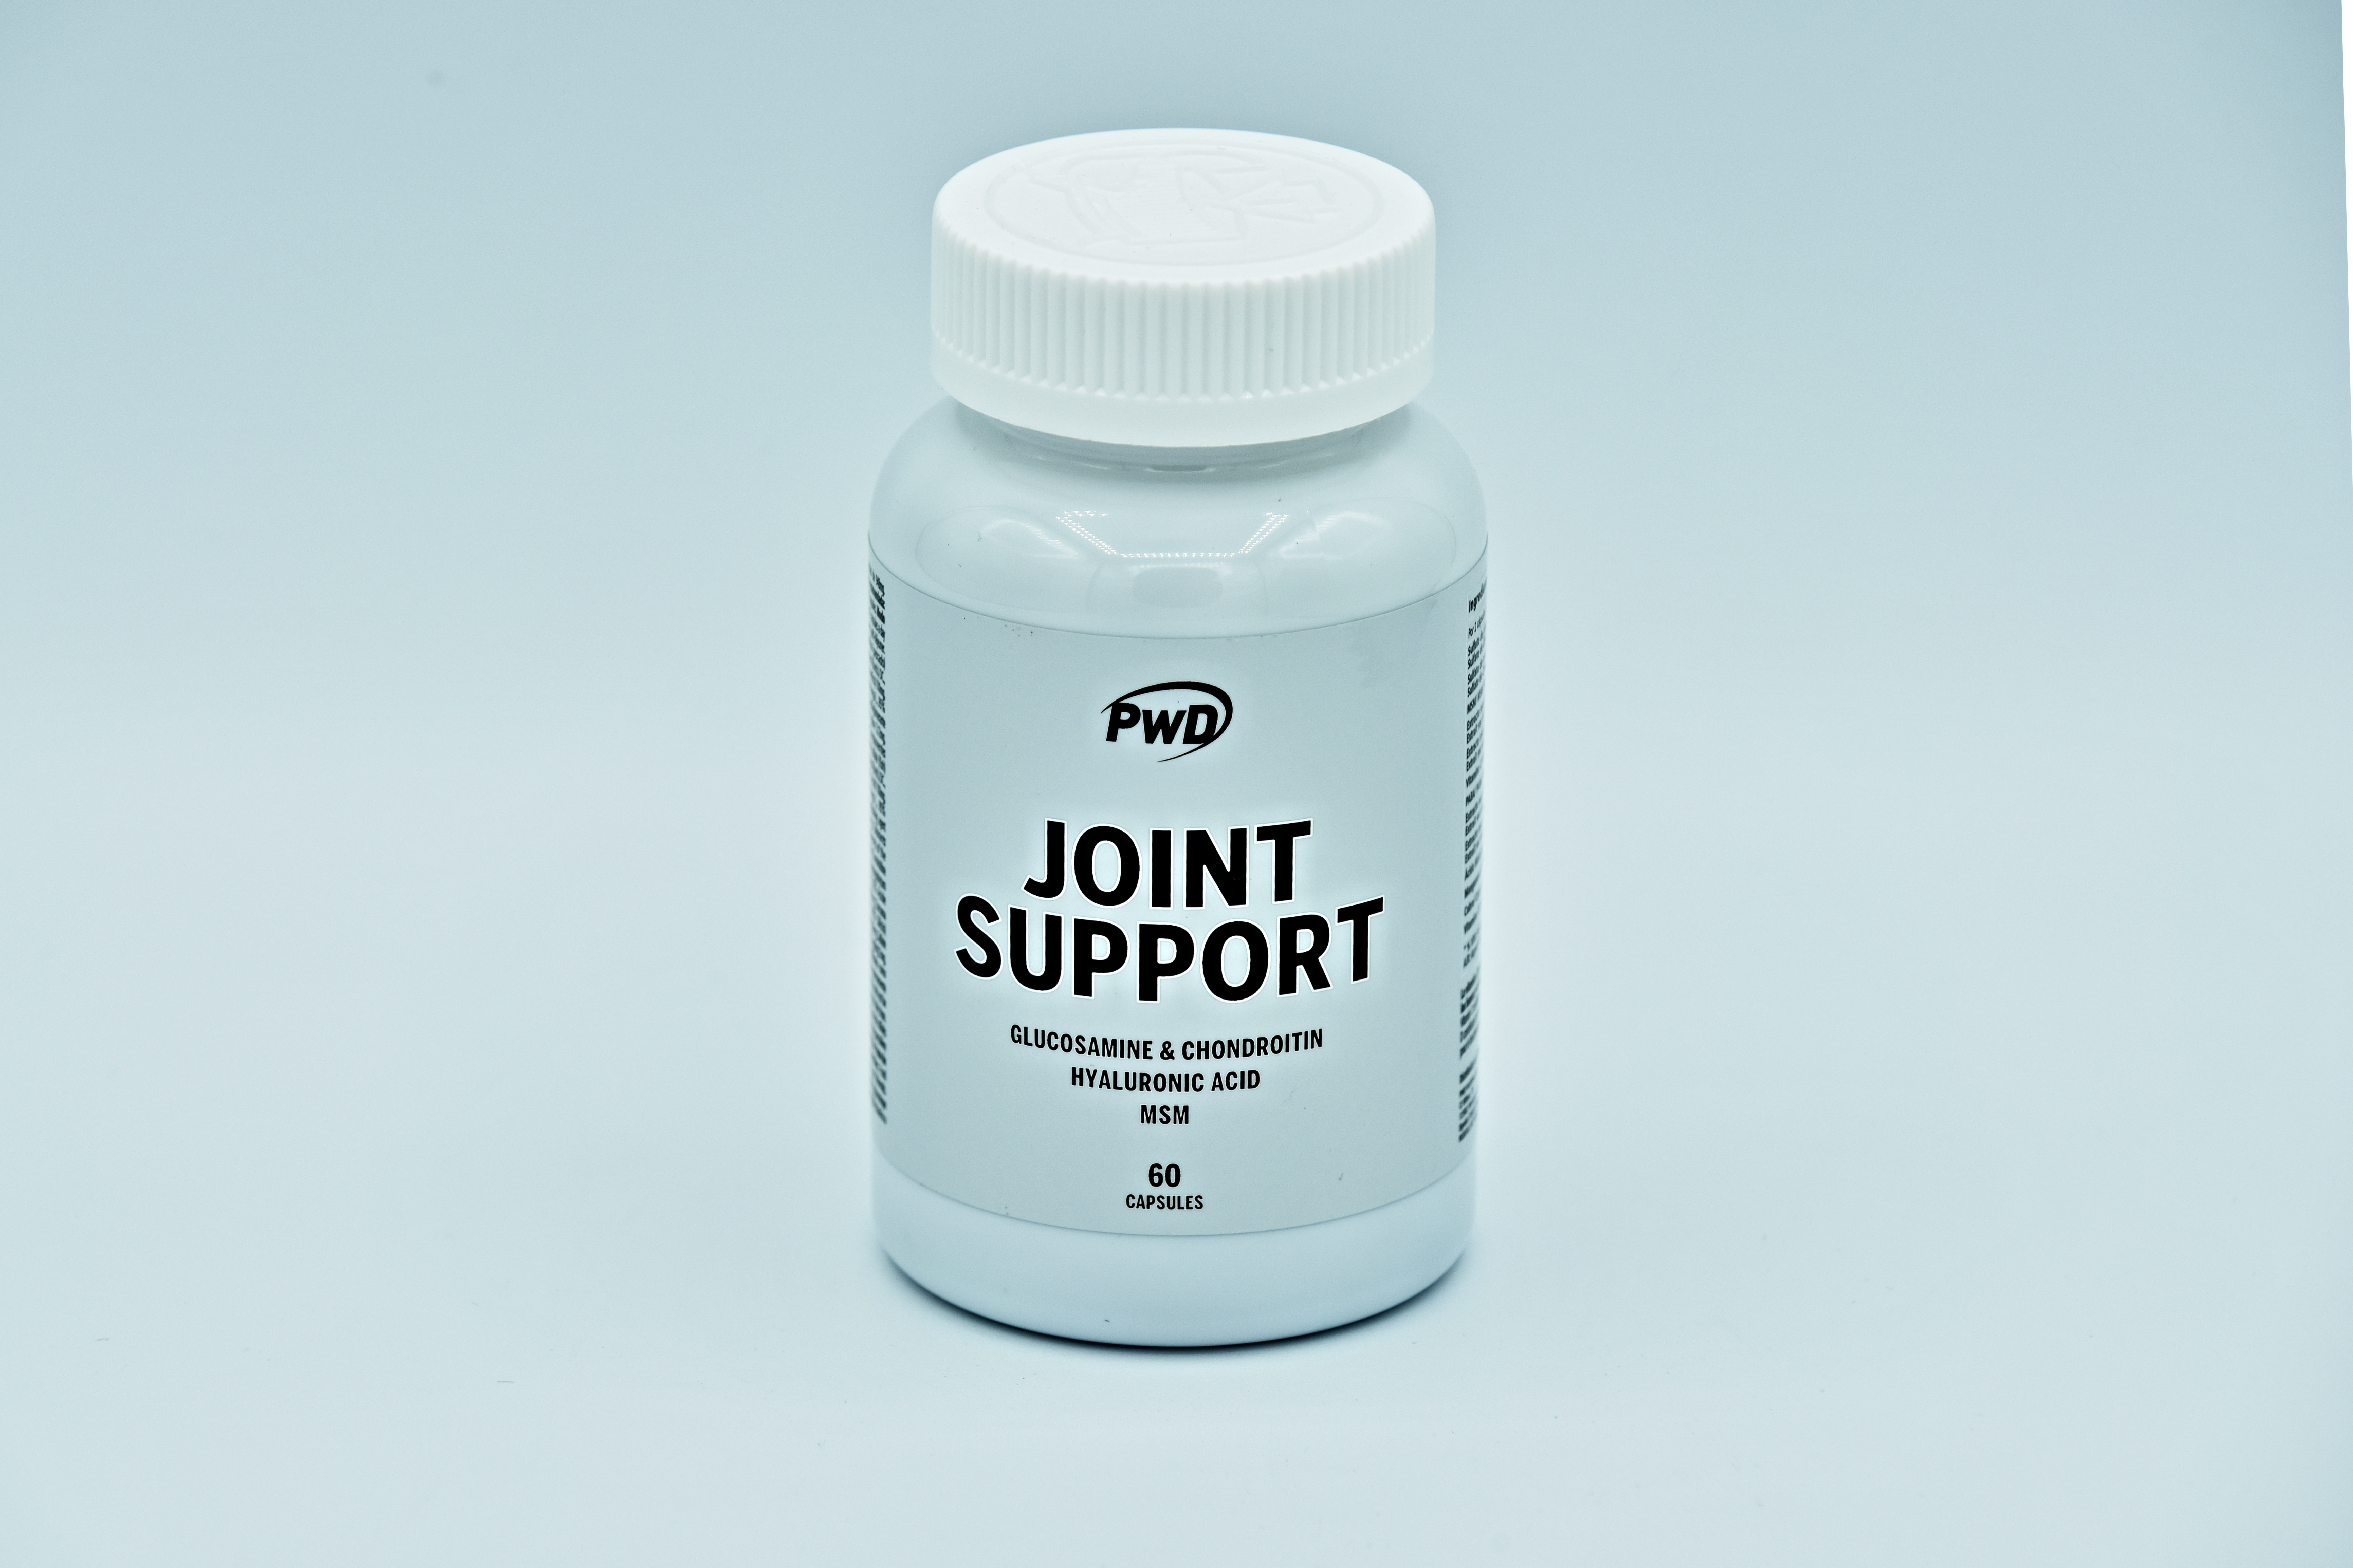 JOINT SUPPORT (Protección articular)